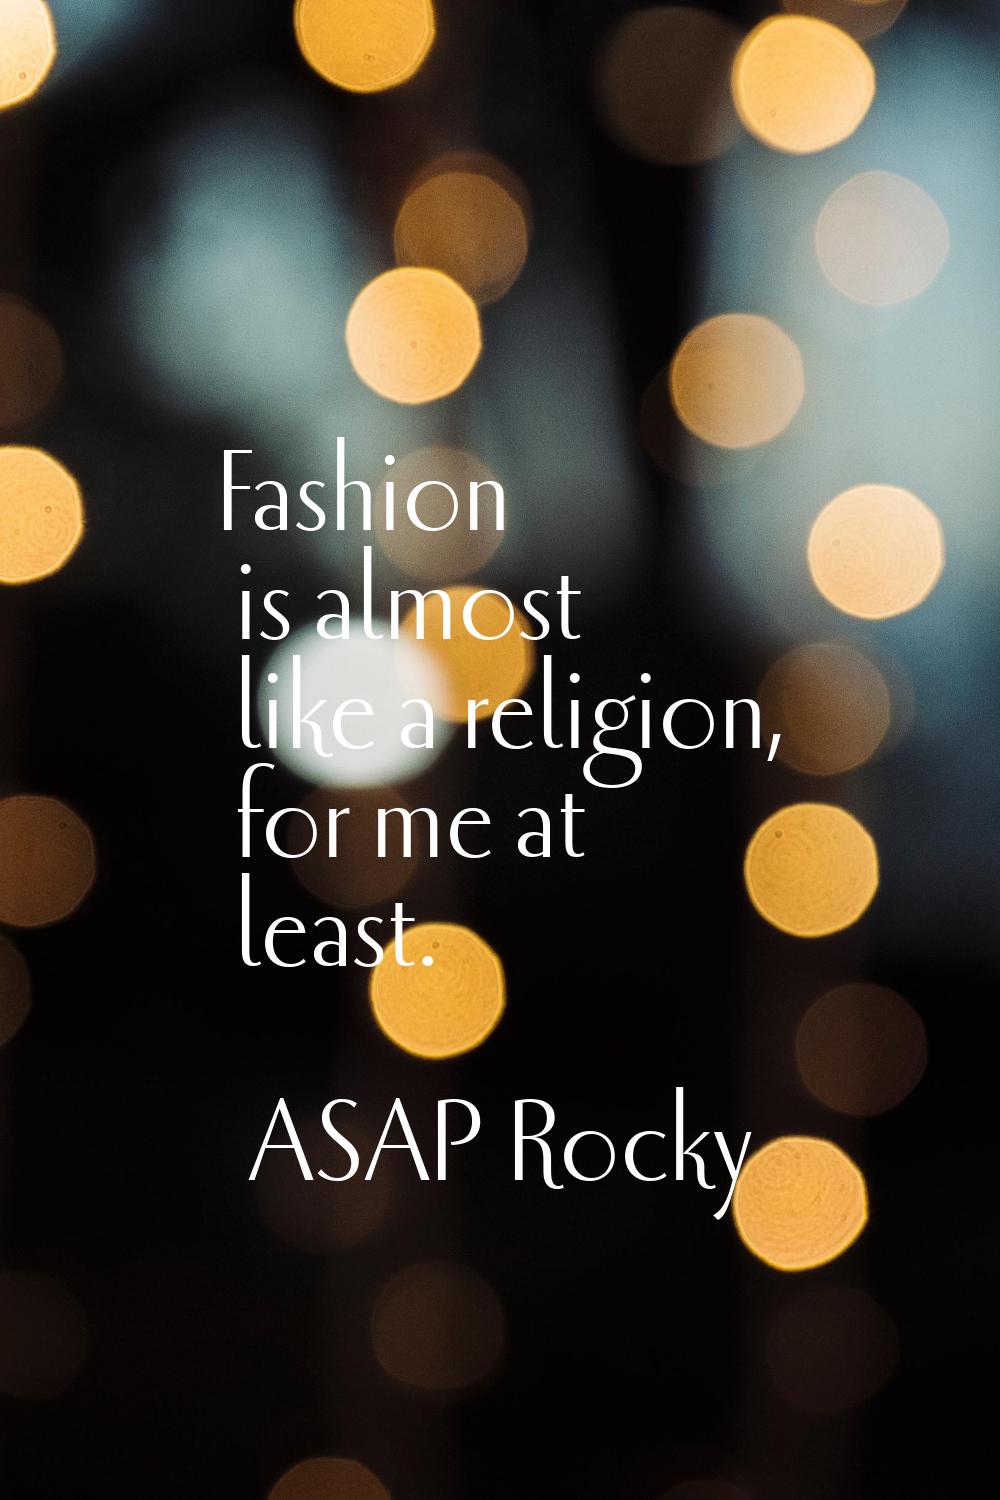 Fashion is almost like a religion, for me at least.